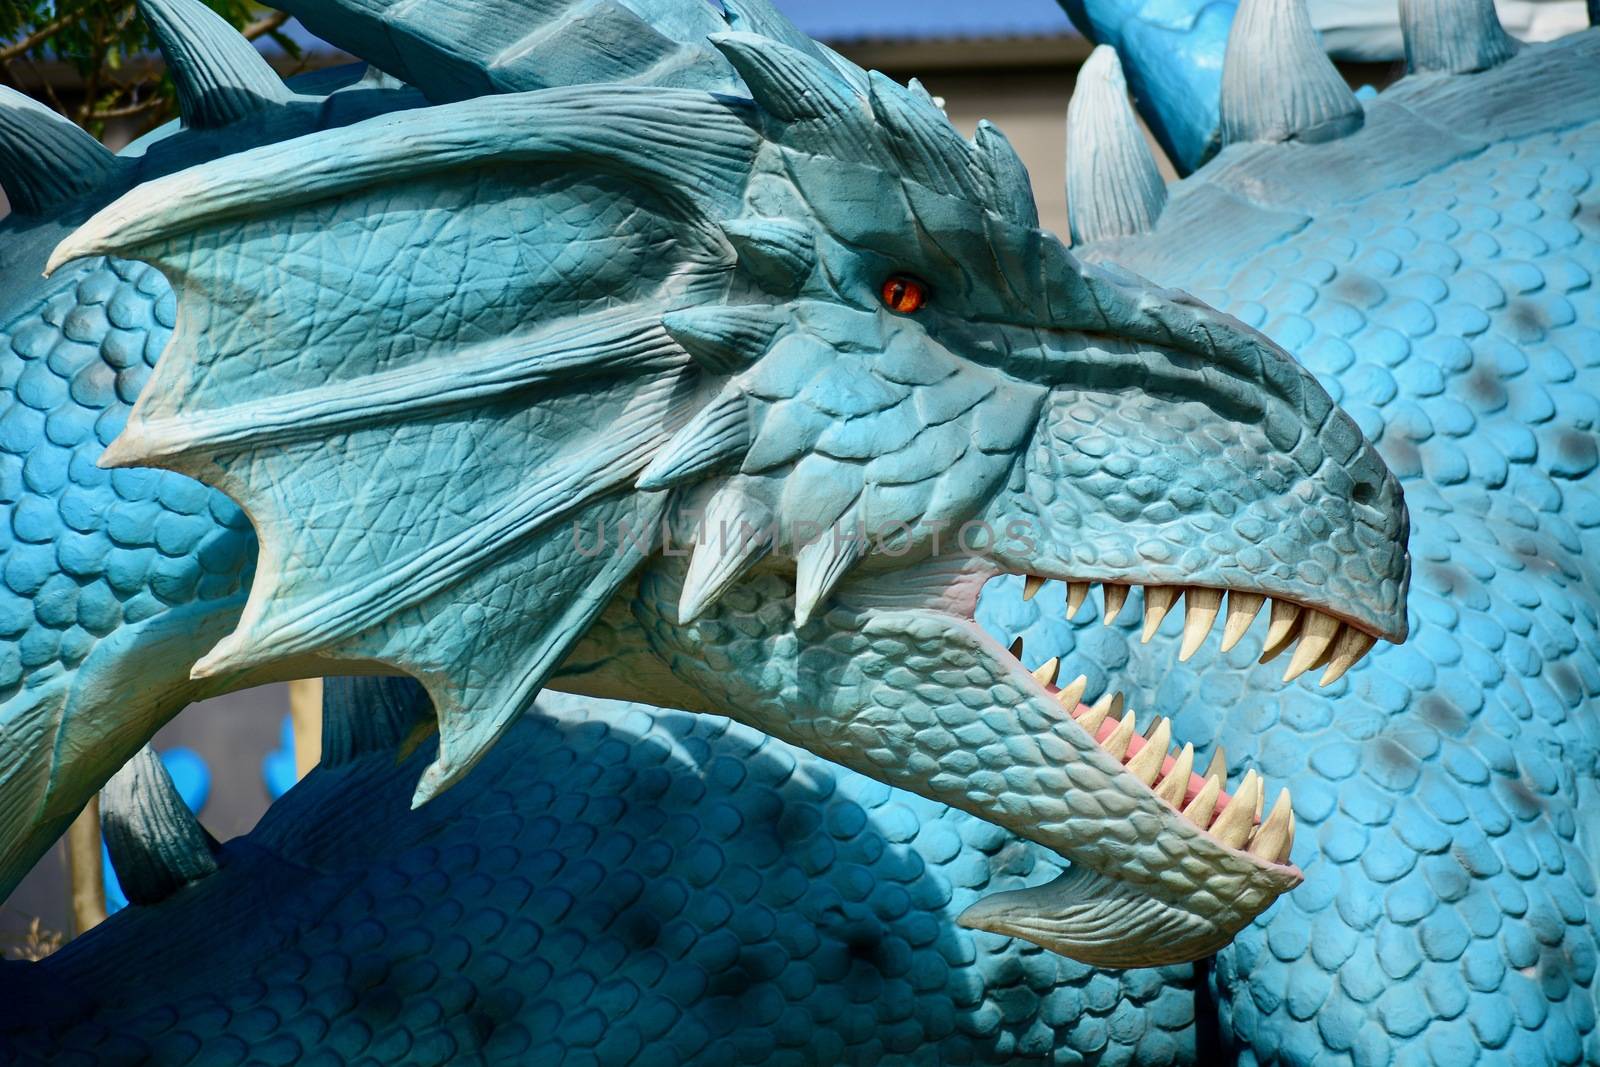 some of the world’s most fantastical legends; life-sized dragon; Mythic Creatures exhibit; local attraction